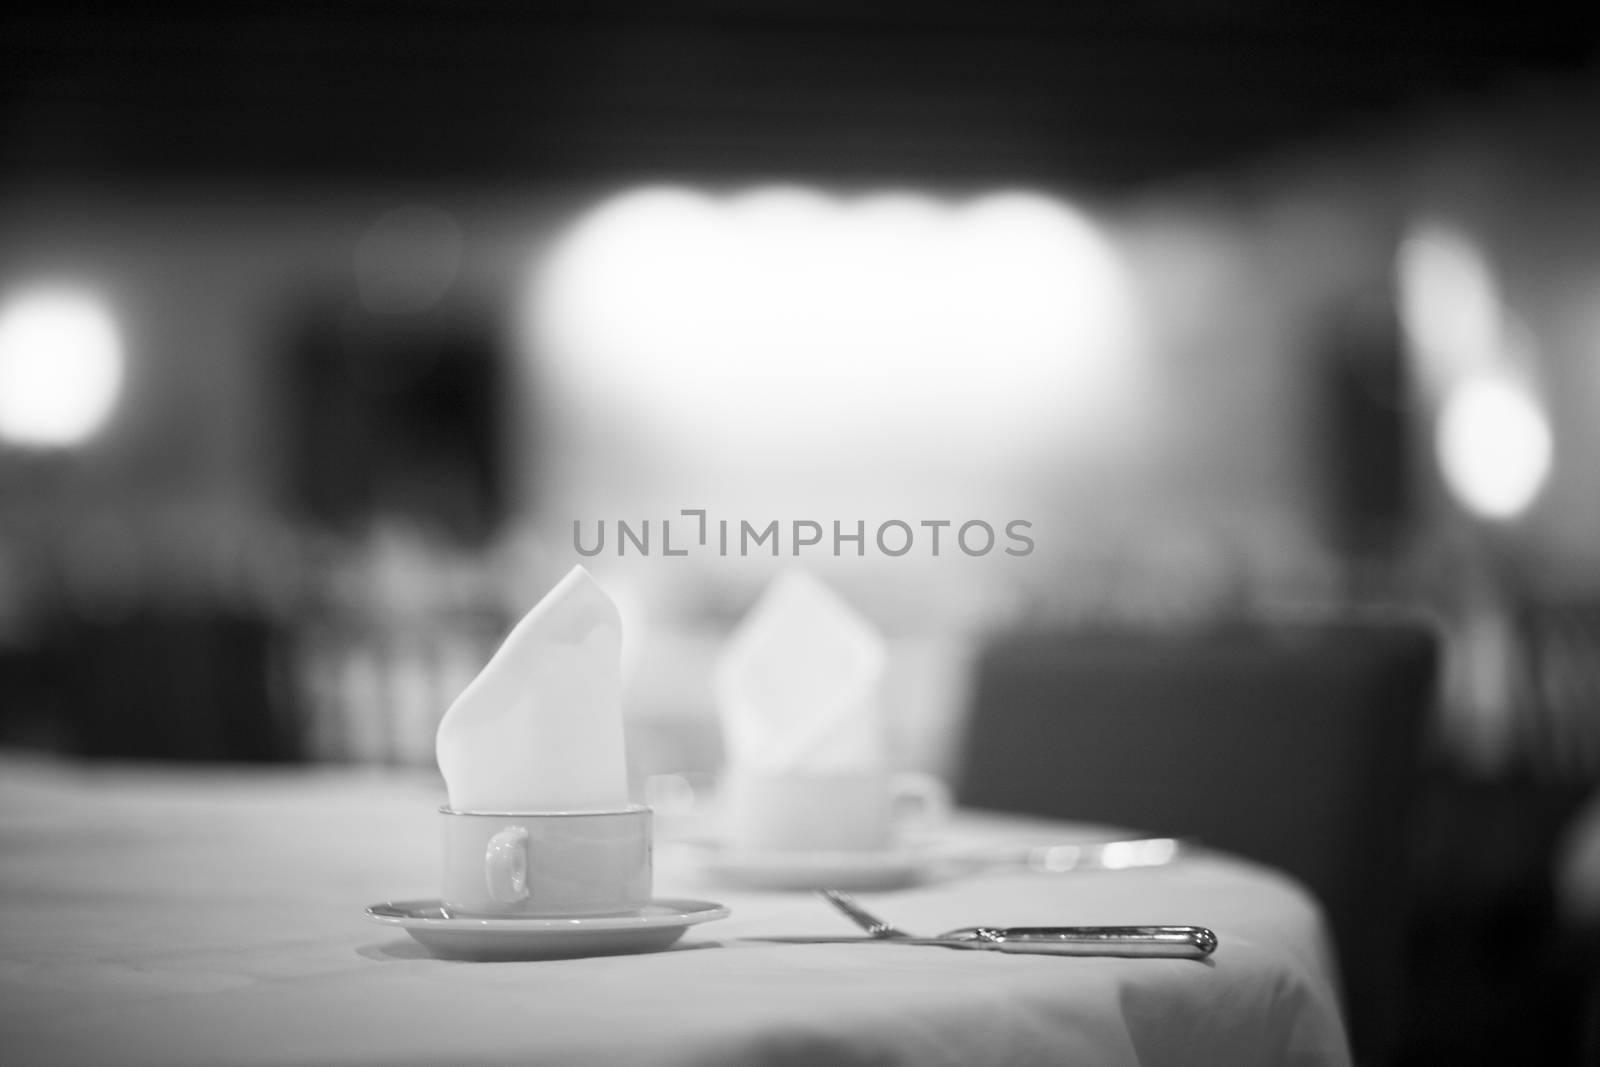 Coffee tea cup on wedding marriage reception banquet table with saucer, serviette and cutlery black and white photo. 